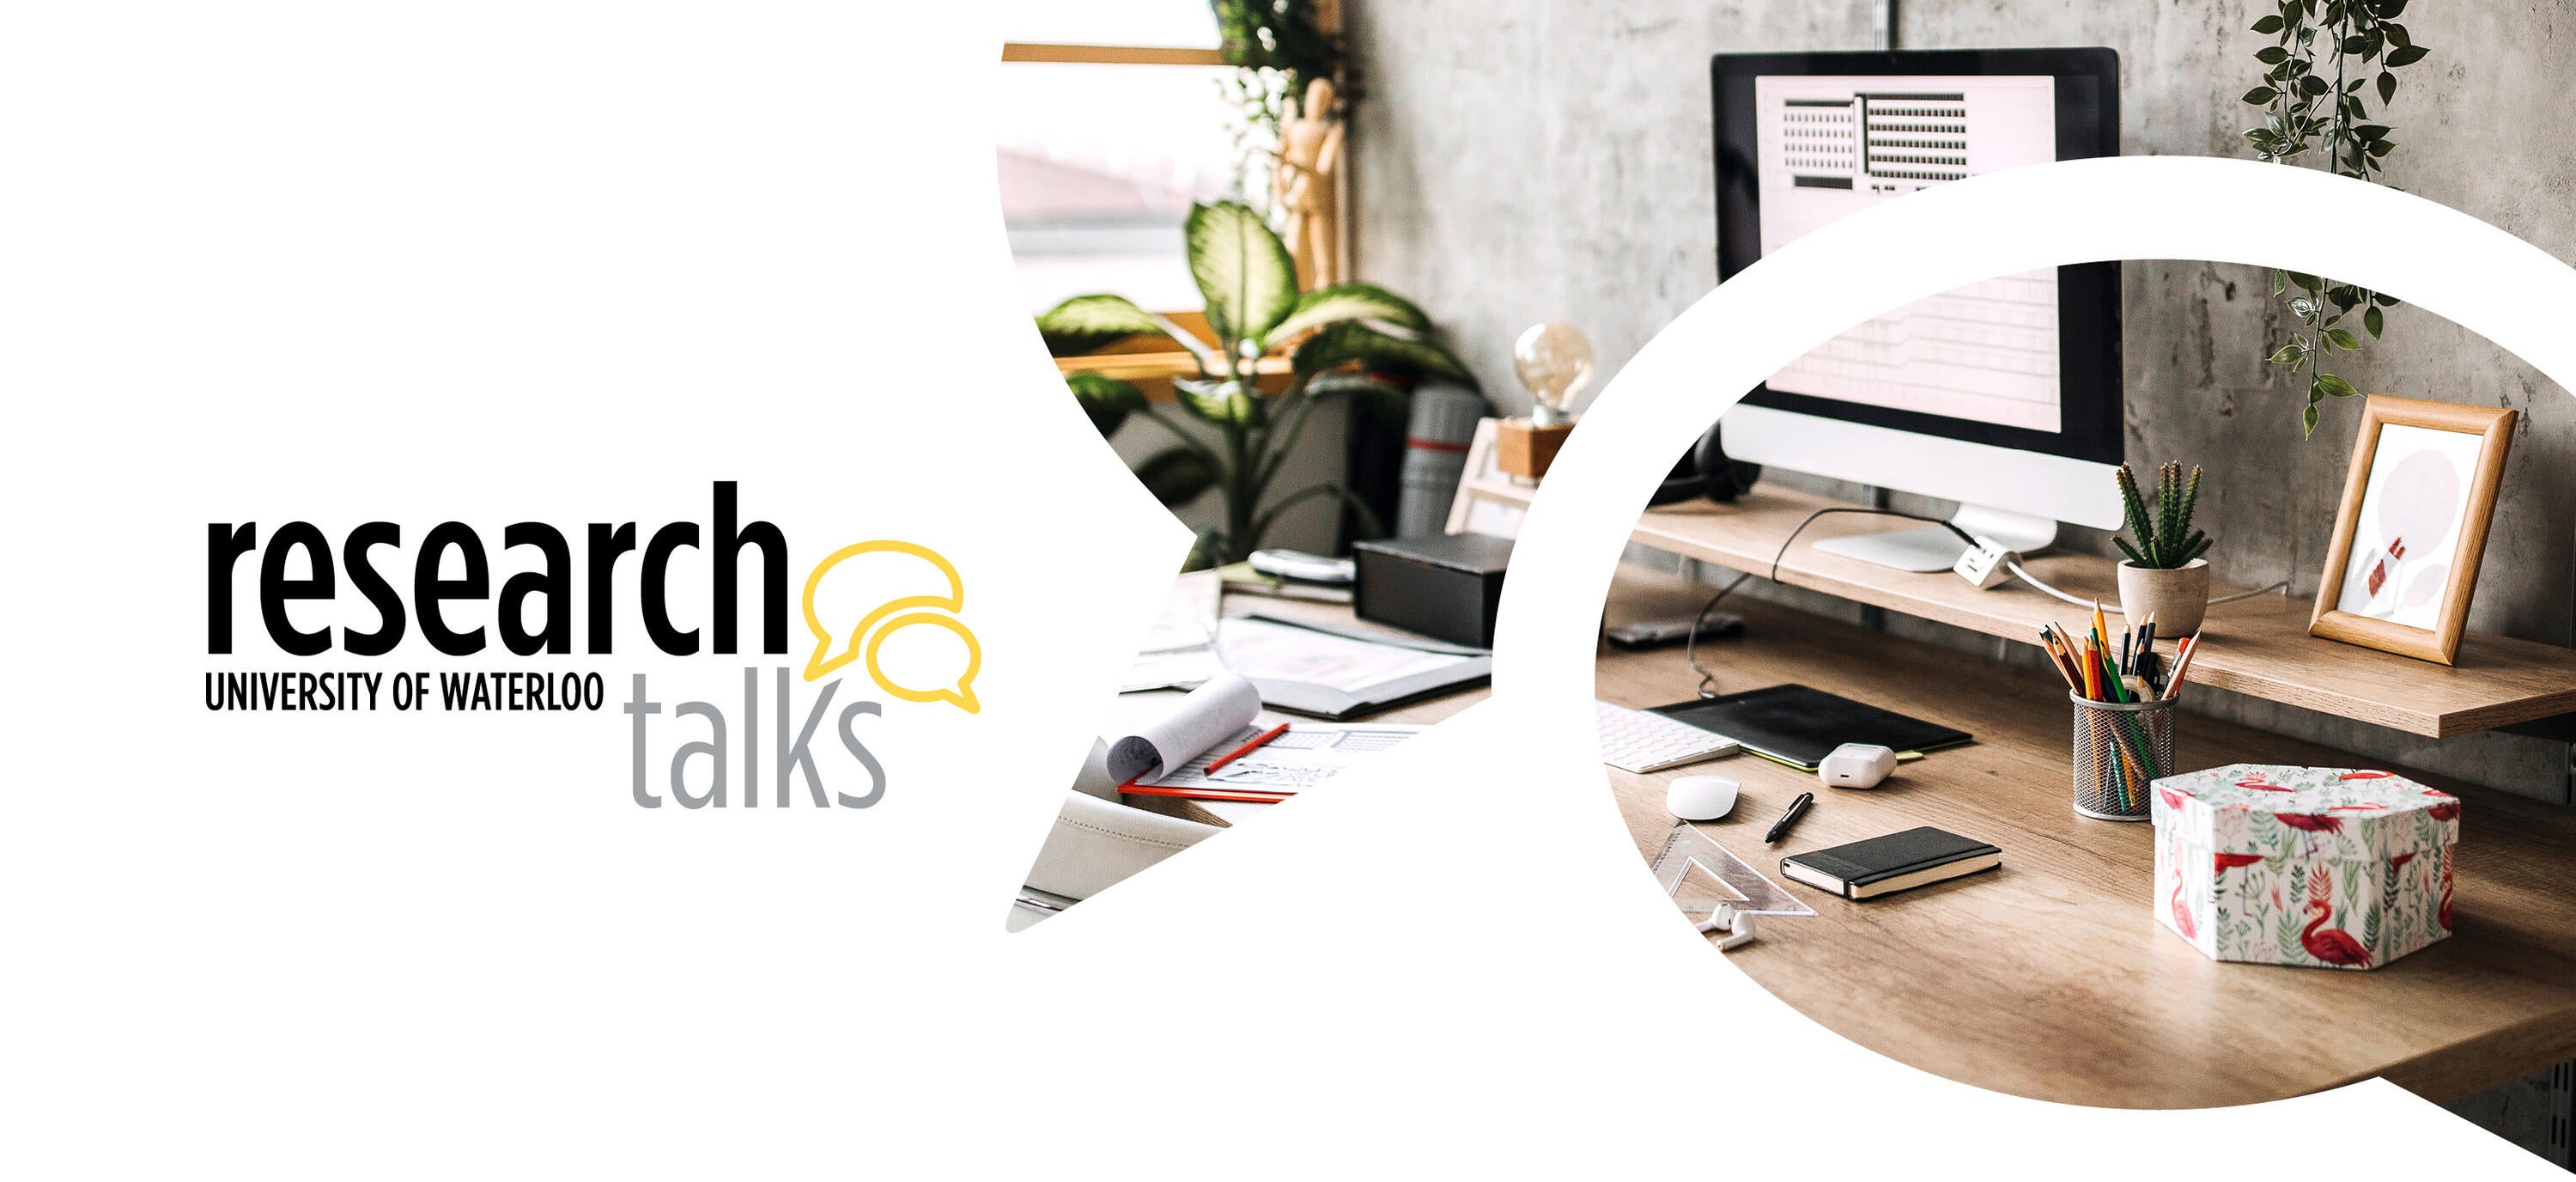 desk with research talks logo overlay